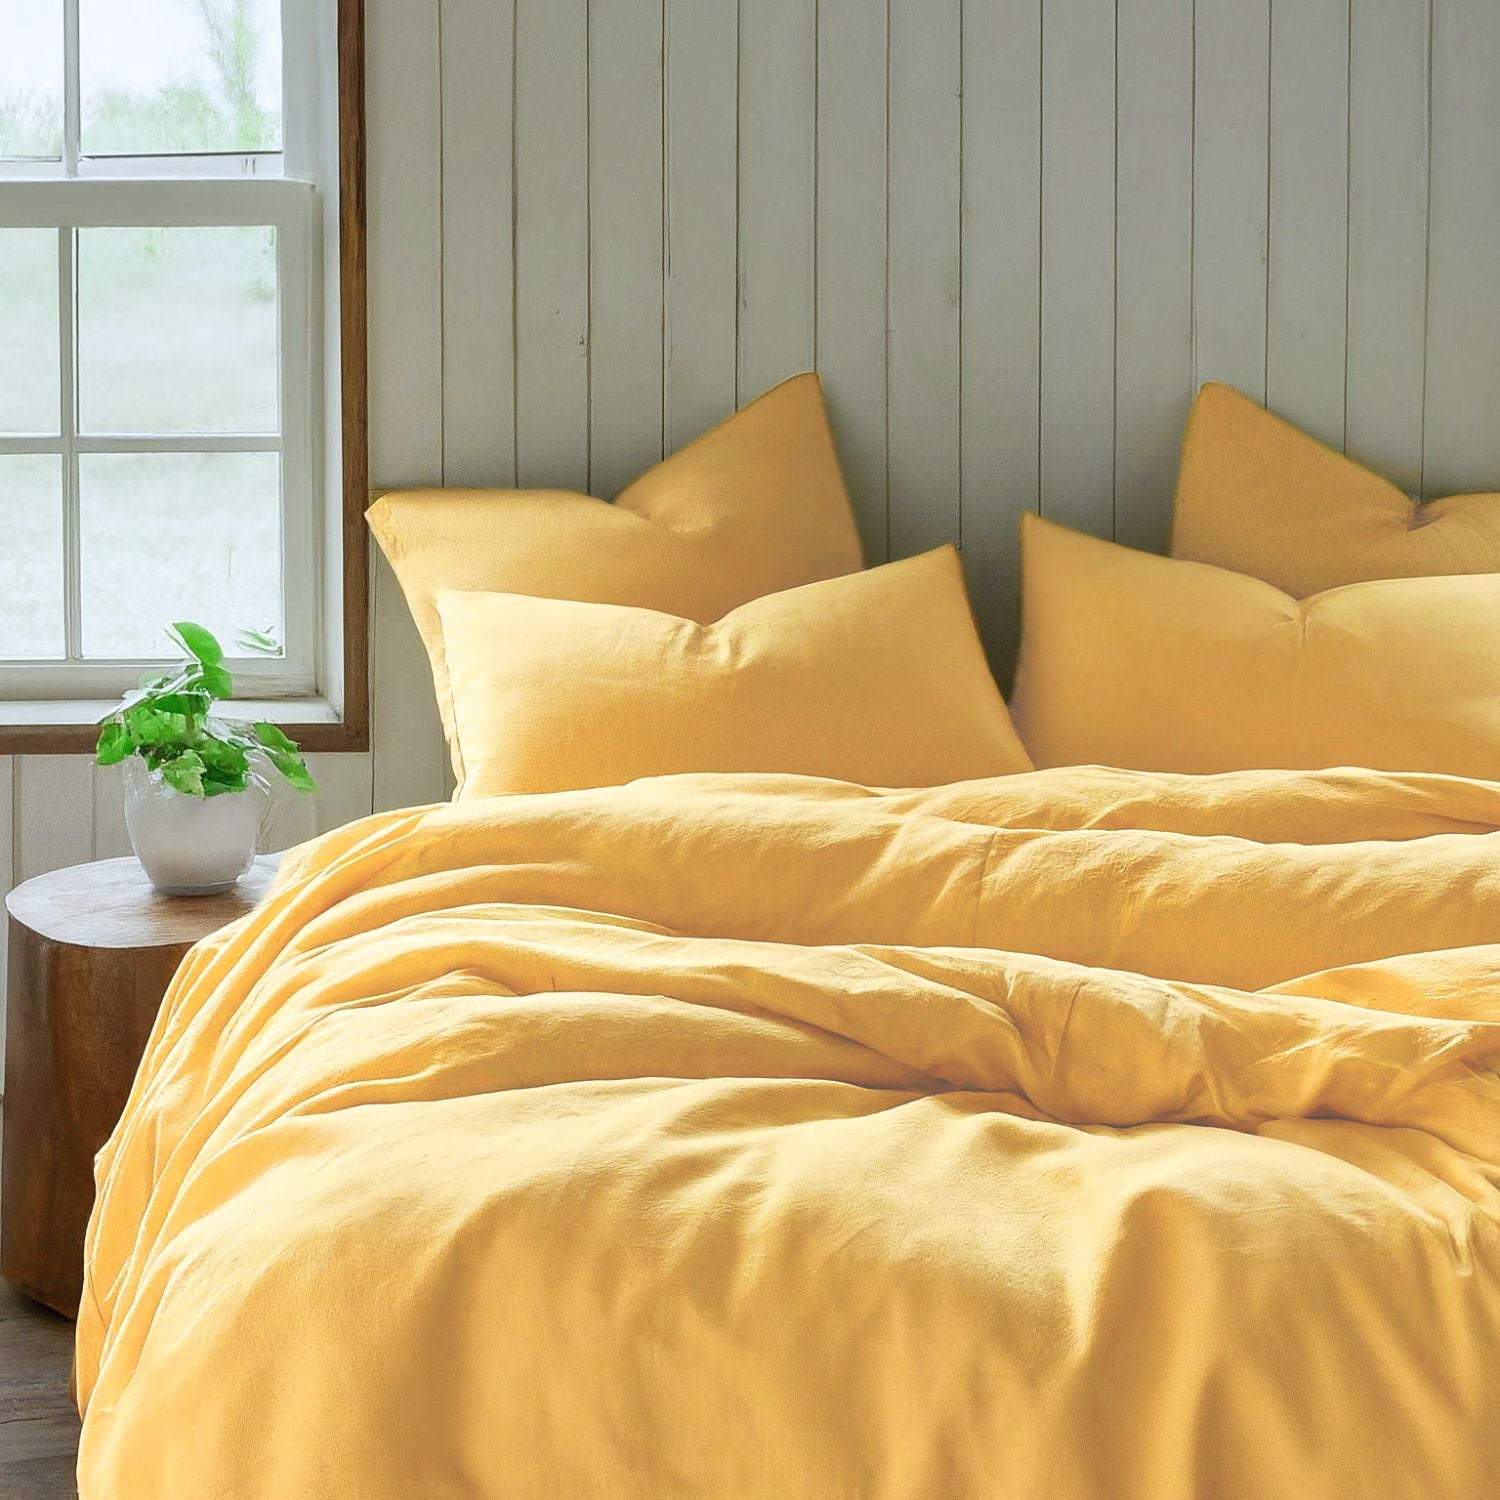 A bed with a soft light yellow duvet cover and  pillows next to a window in a farmhouse Bedroom